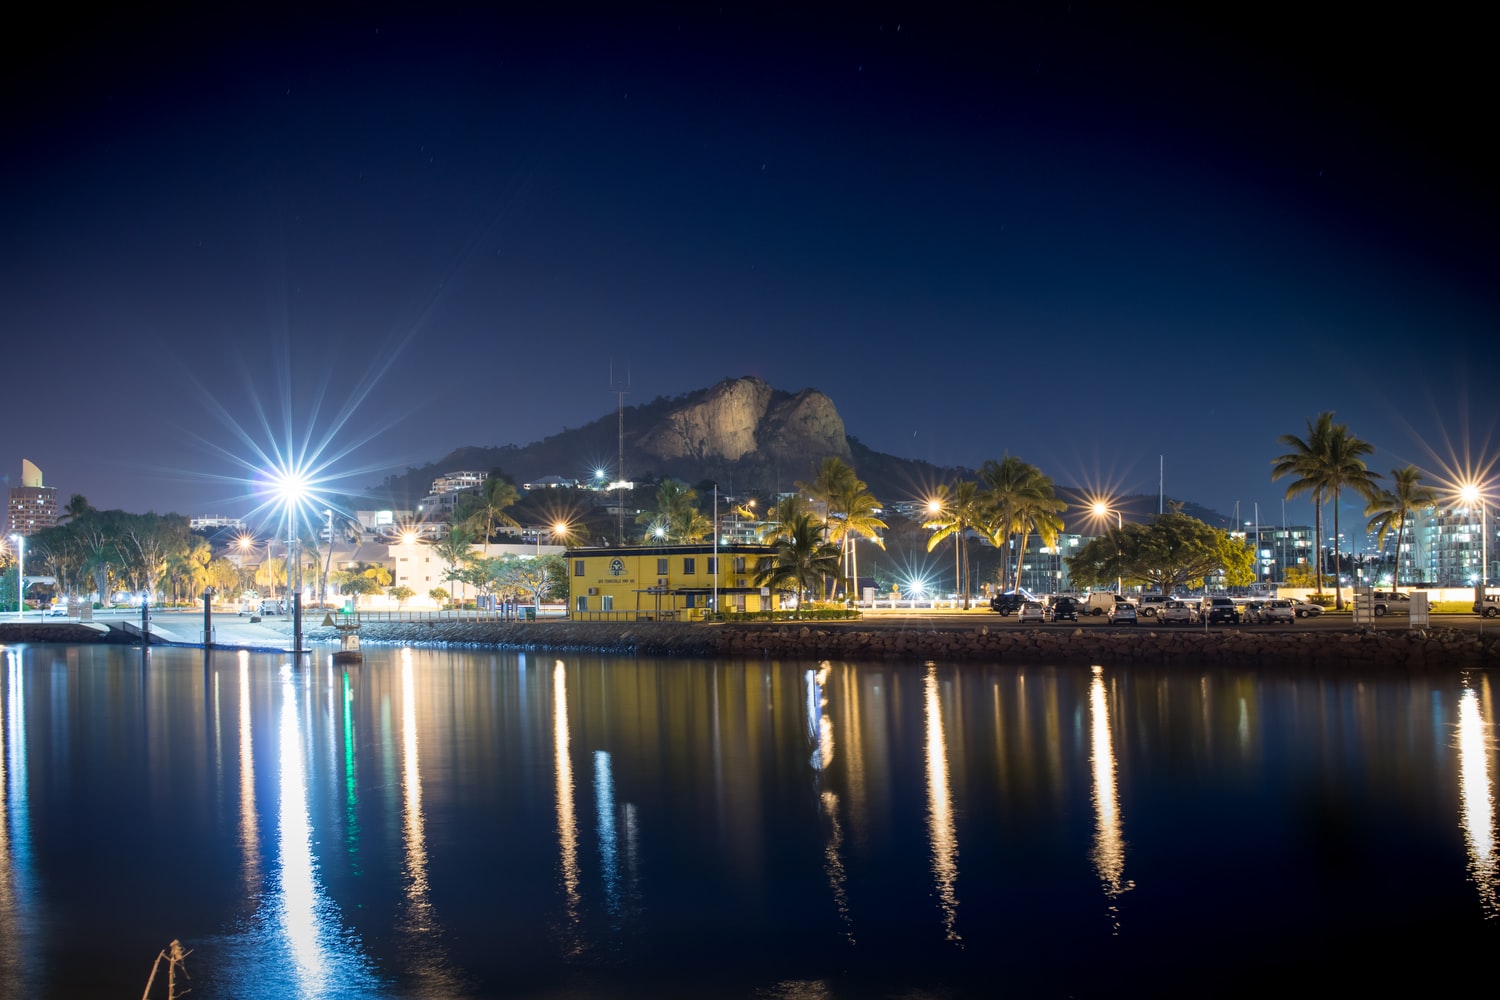 A view of the Townsville Harbour at Night